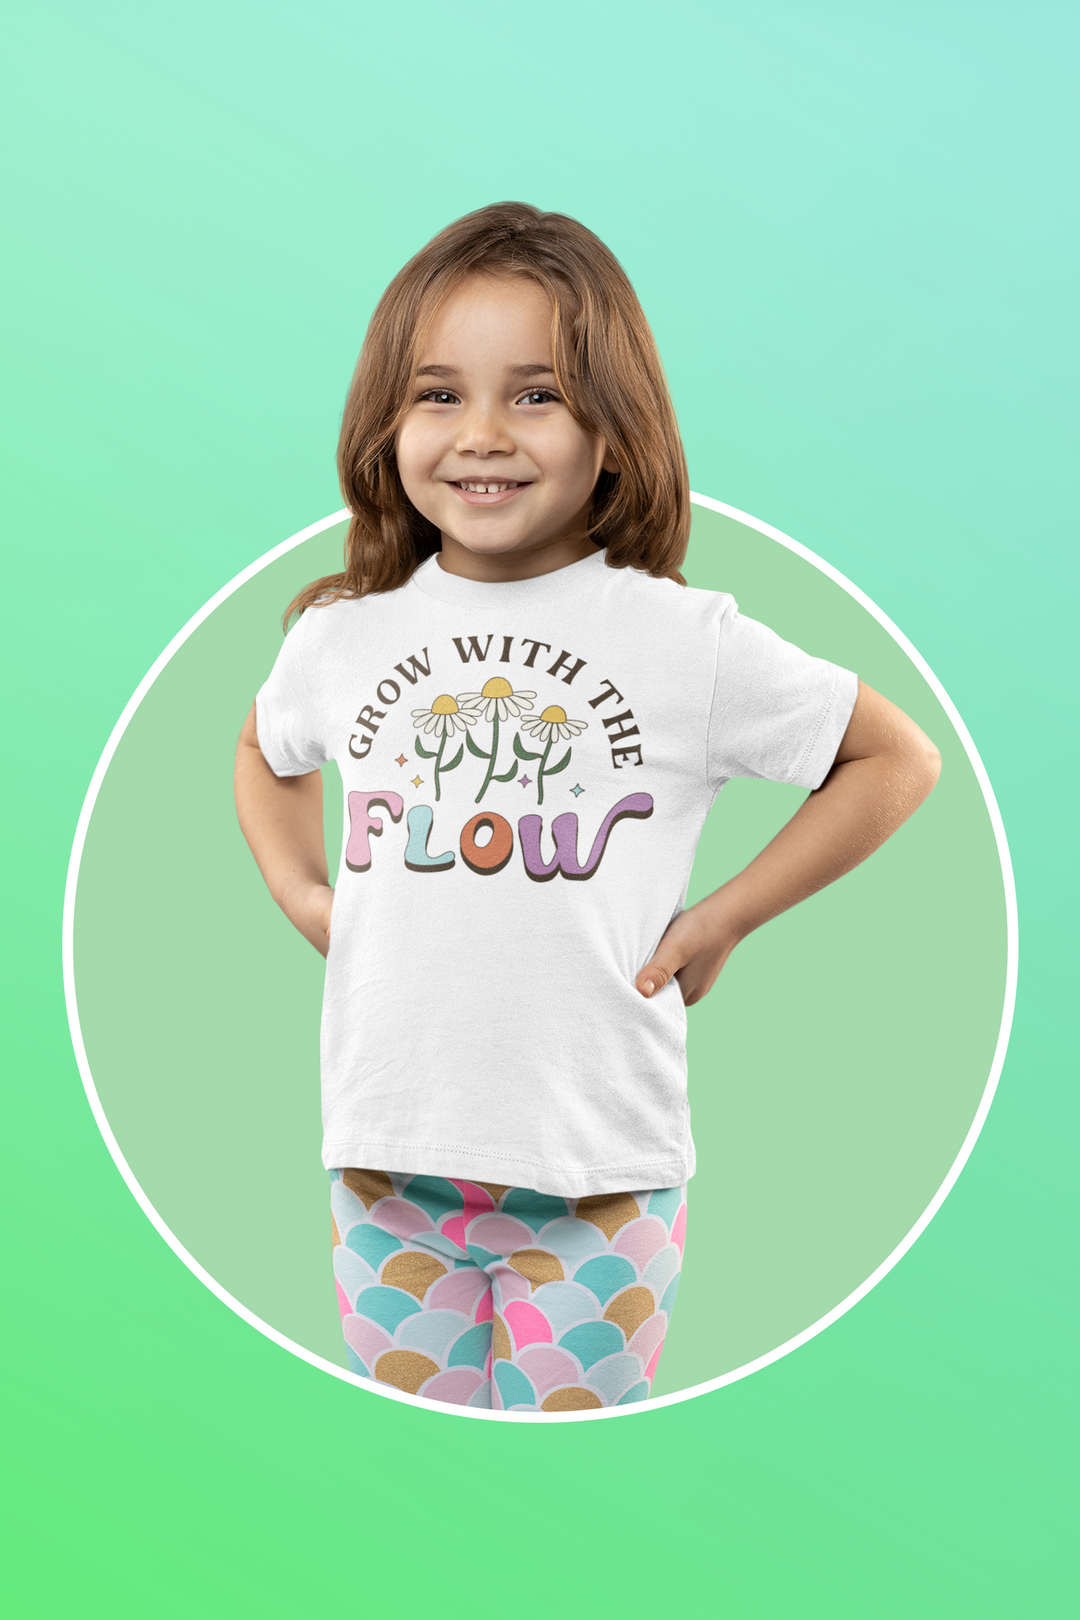 Grow With The Flow. Short Sleeve T Shirt For Toddler And Kids. - TeesForToddlersandKids -  t-shirt - positive - grow-with-the-flow-short-sleeve-t-shirt-for-toddler-and-kids